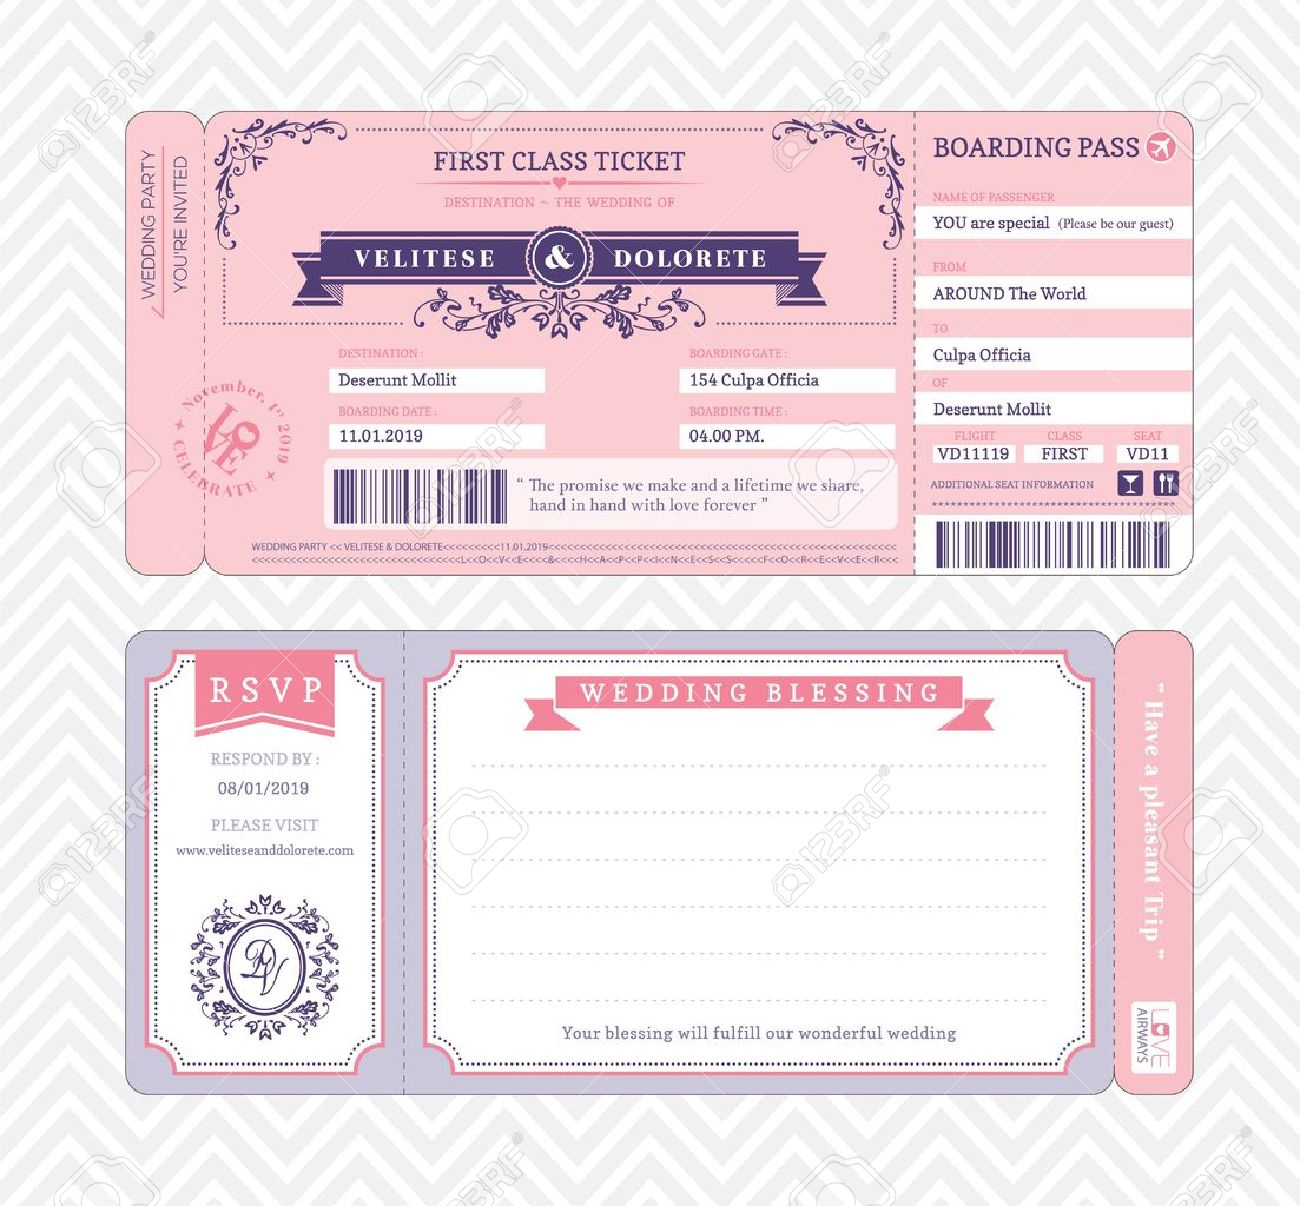 Boarding Pass Ticket Wedding Invitation Template Royalty Free throughout proportions 1300 X 1206